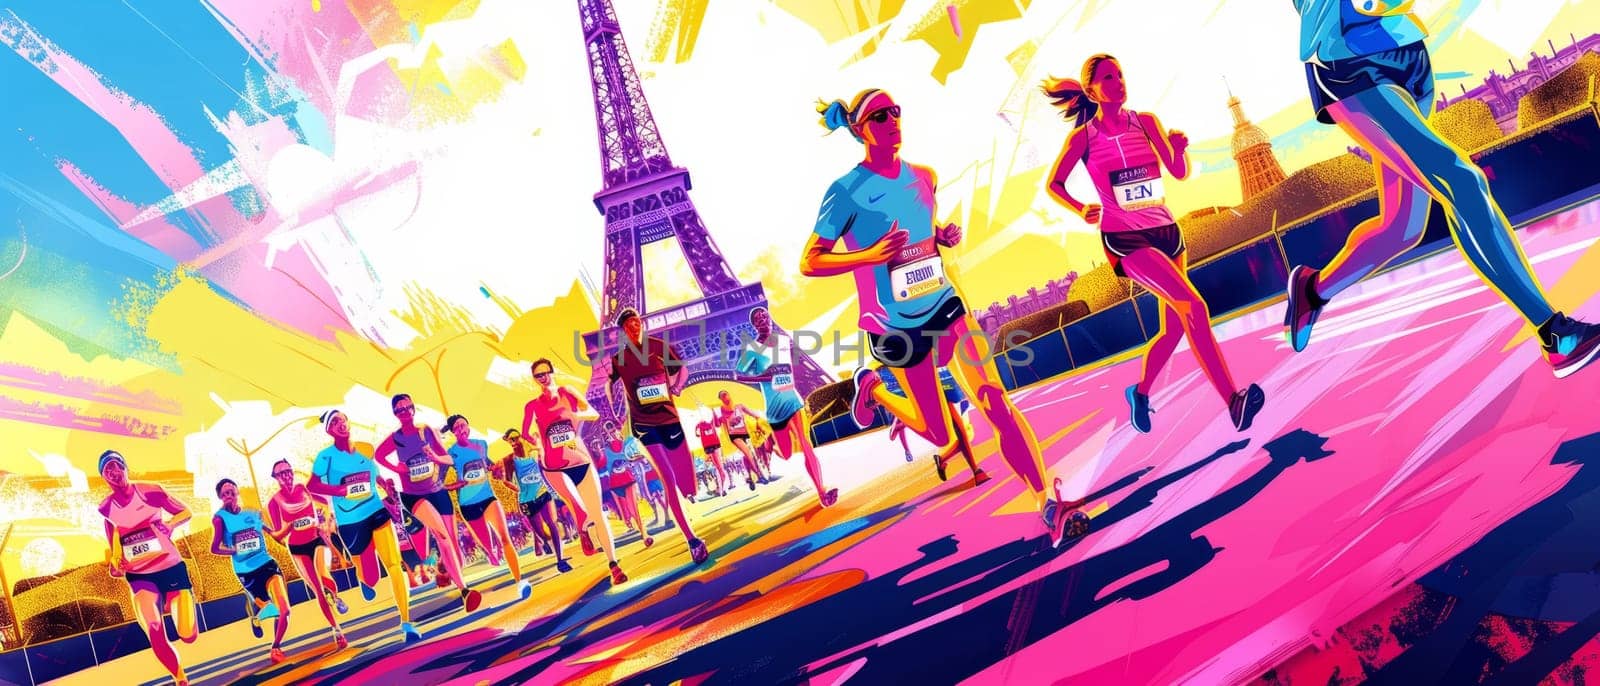 Dynamic illustration of marathon runners in vivid colors with the Eiffel Tower in the background, conveying movement and energy. by sfinks